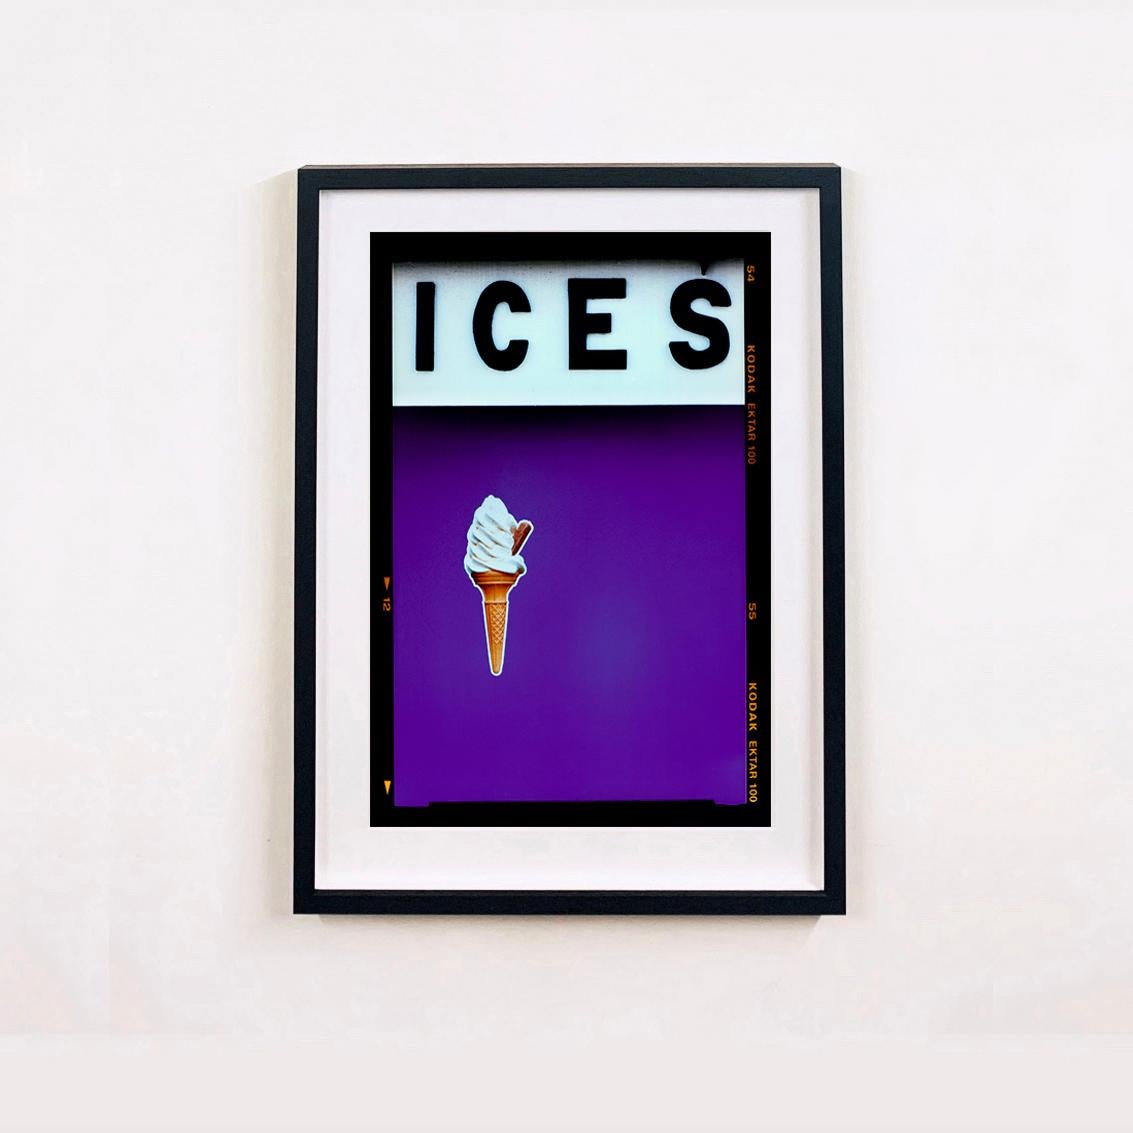 ICES Mustard Yellow, Purple, Green, Baby Blue - Four Framed Pop Art Photographs For Sale 2